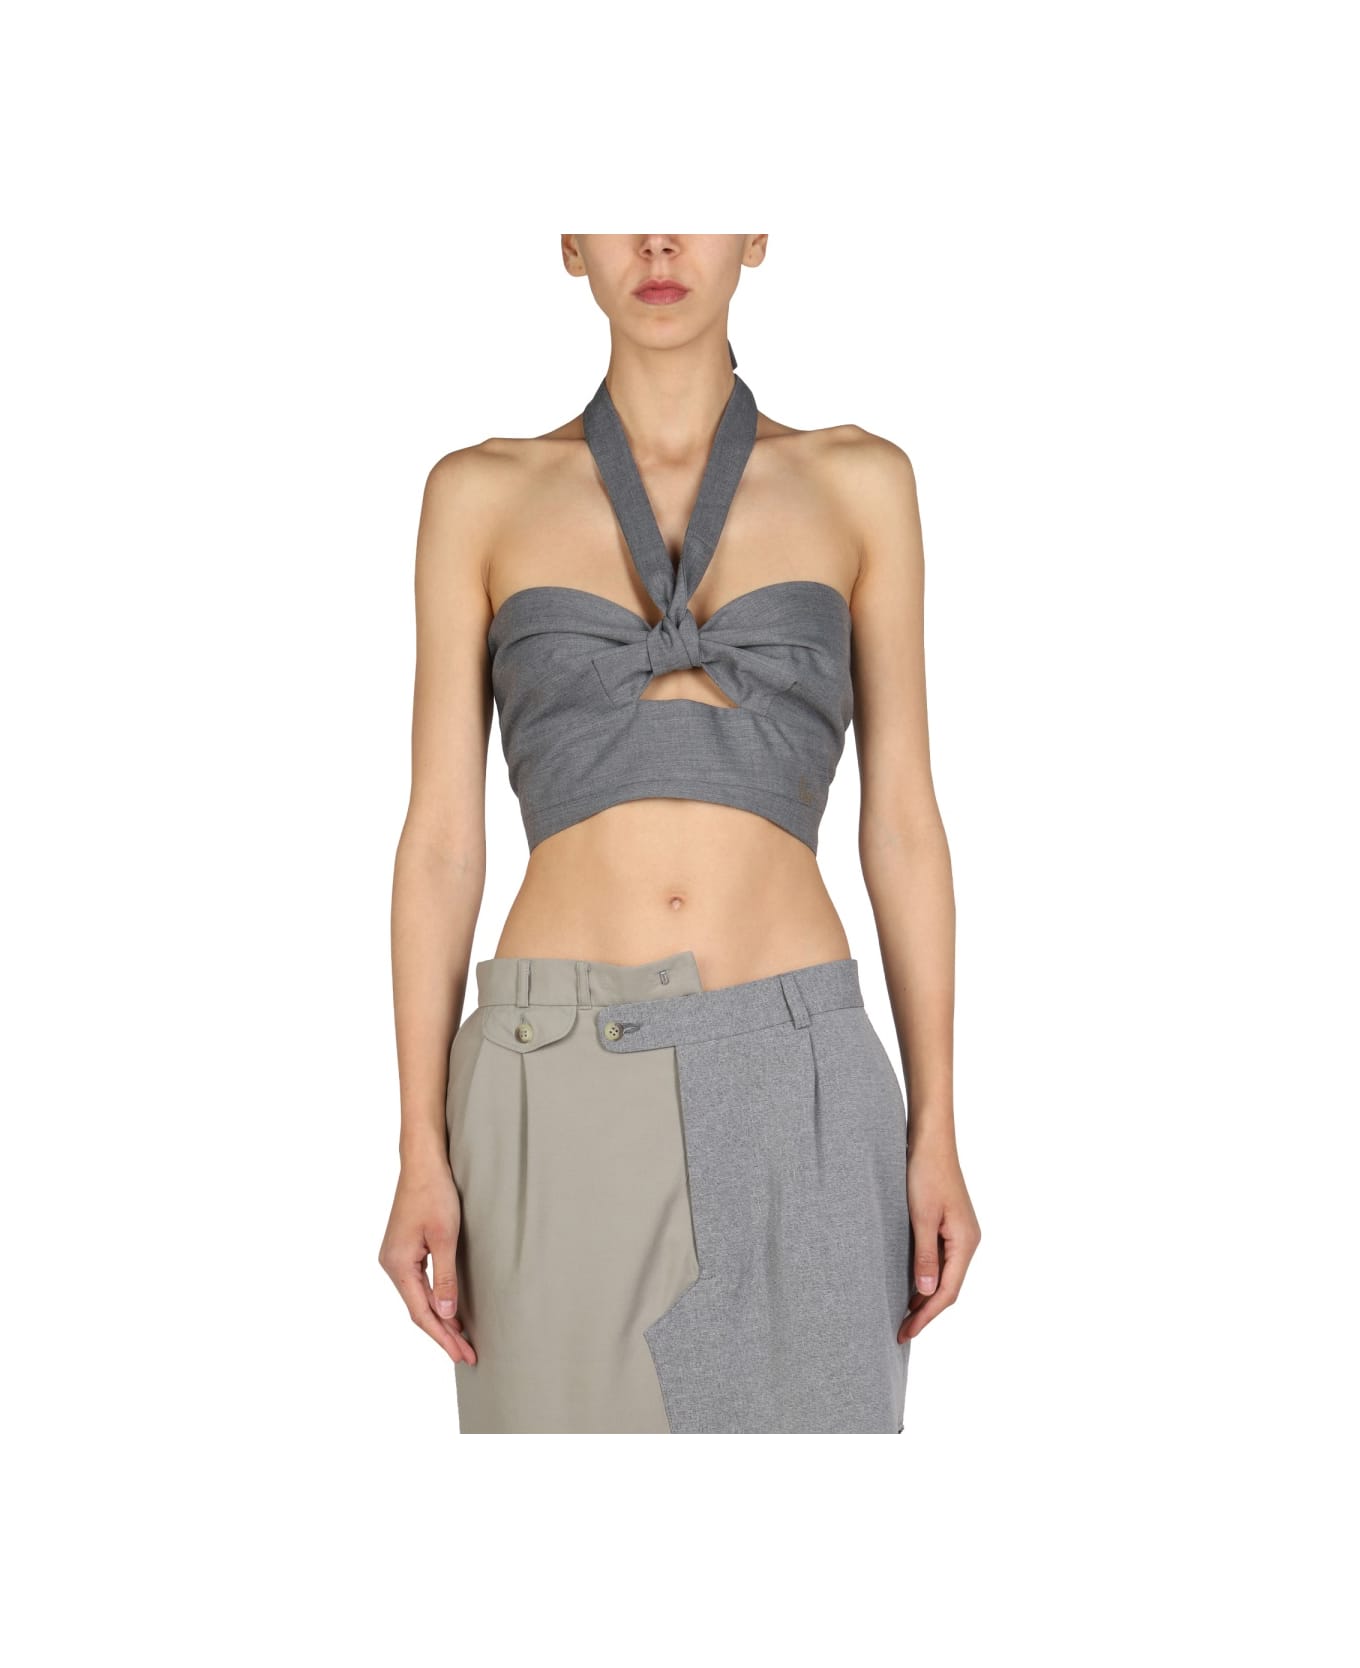 1/OFF Top With Crossed Straps - GREY